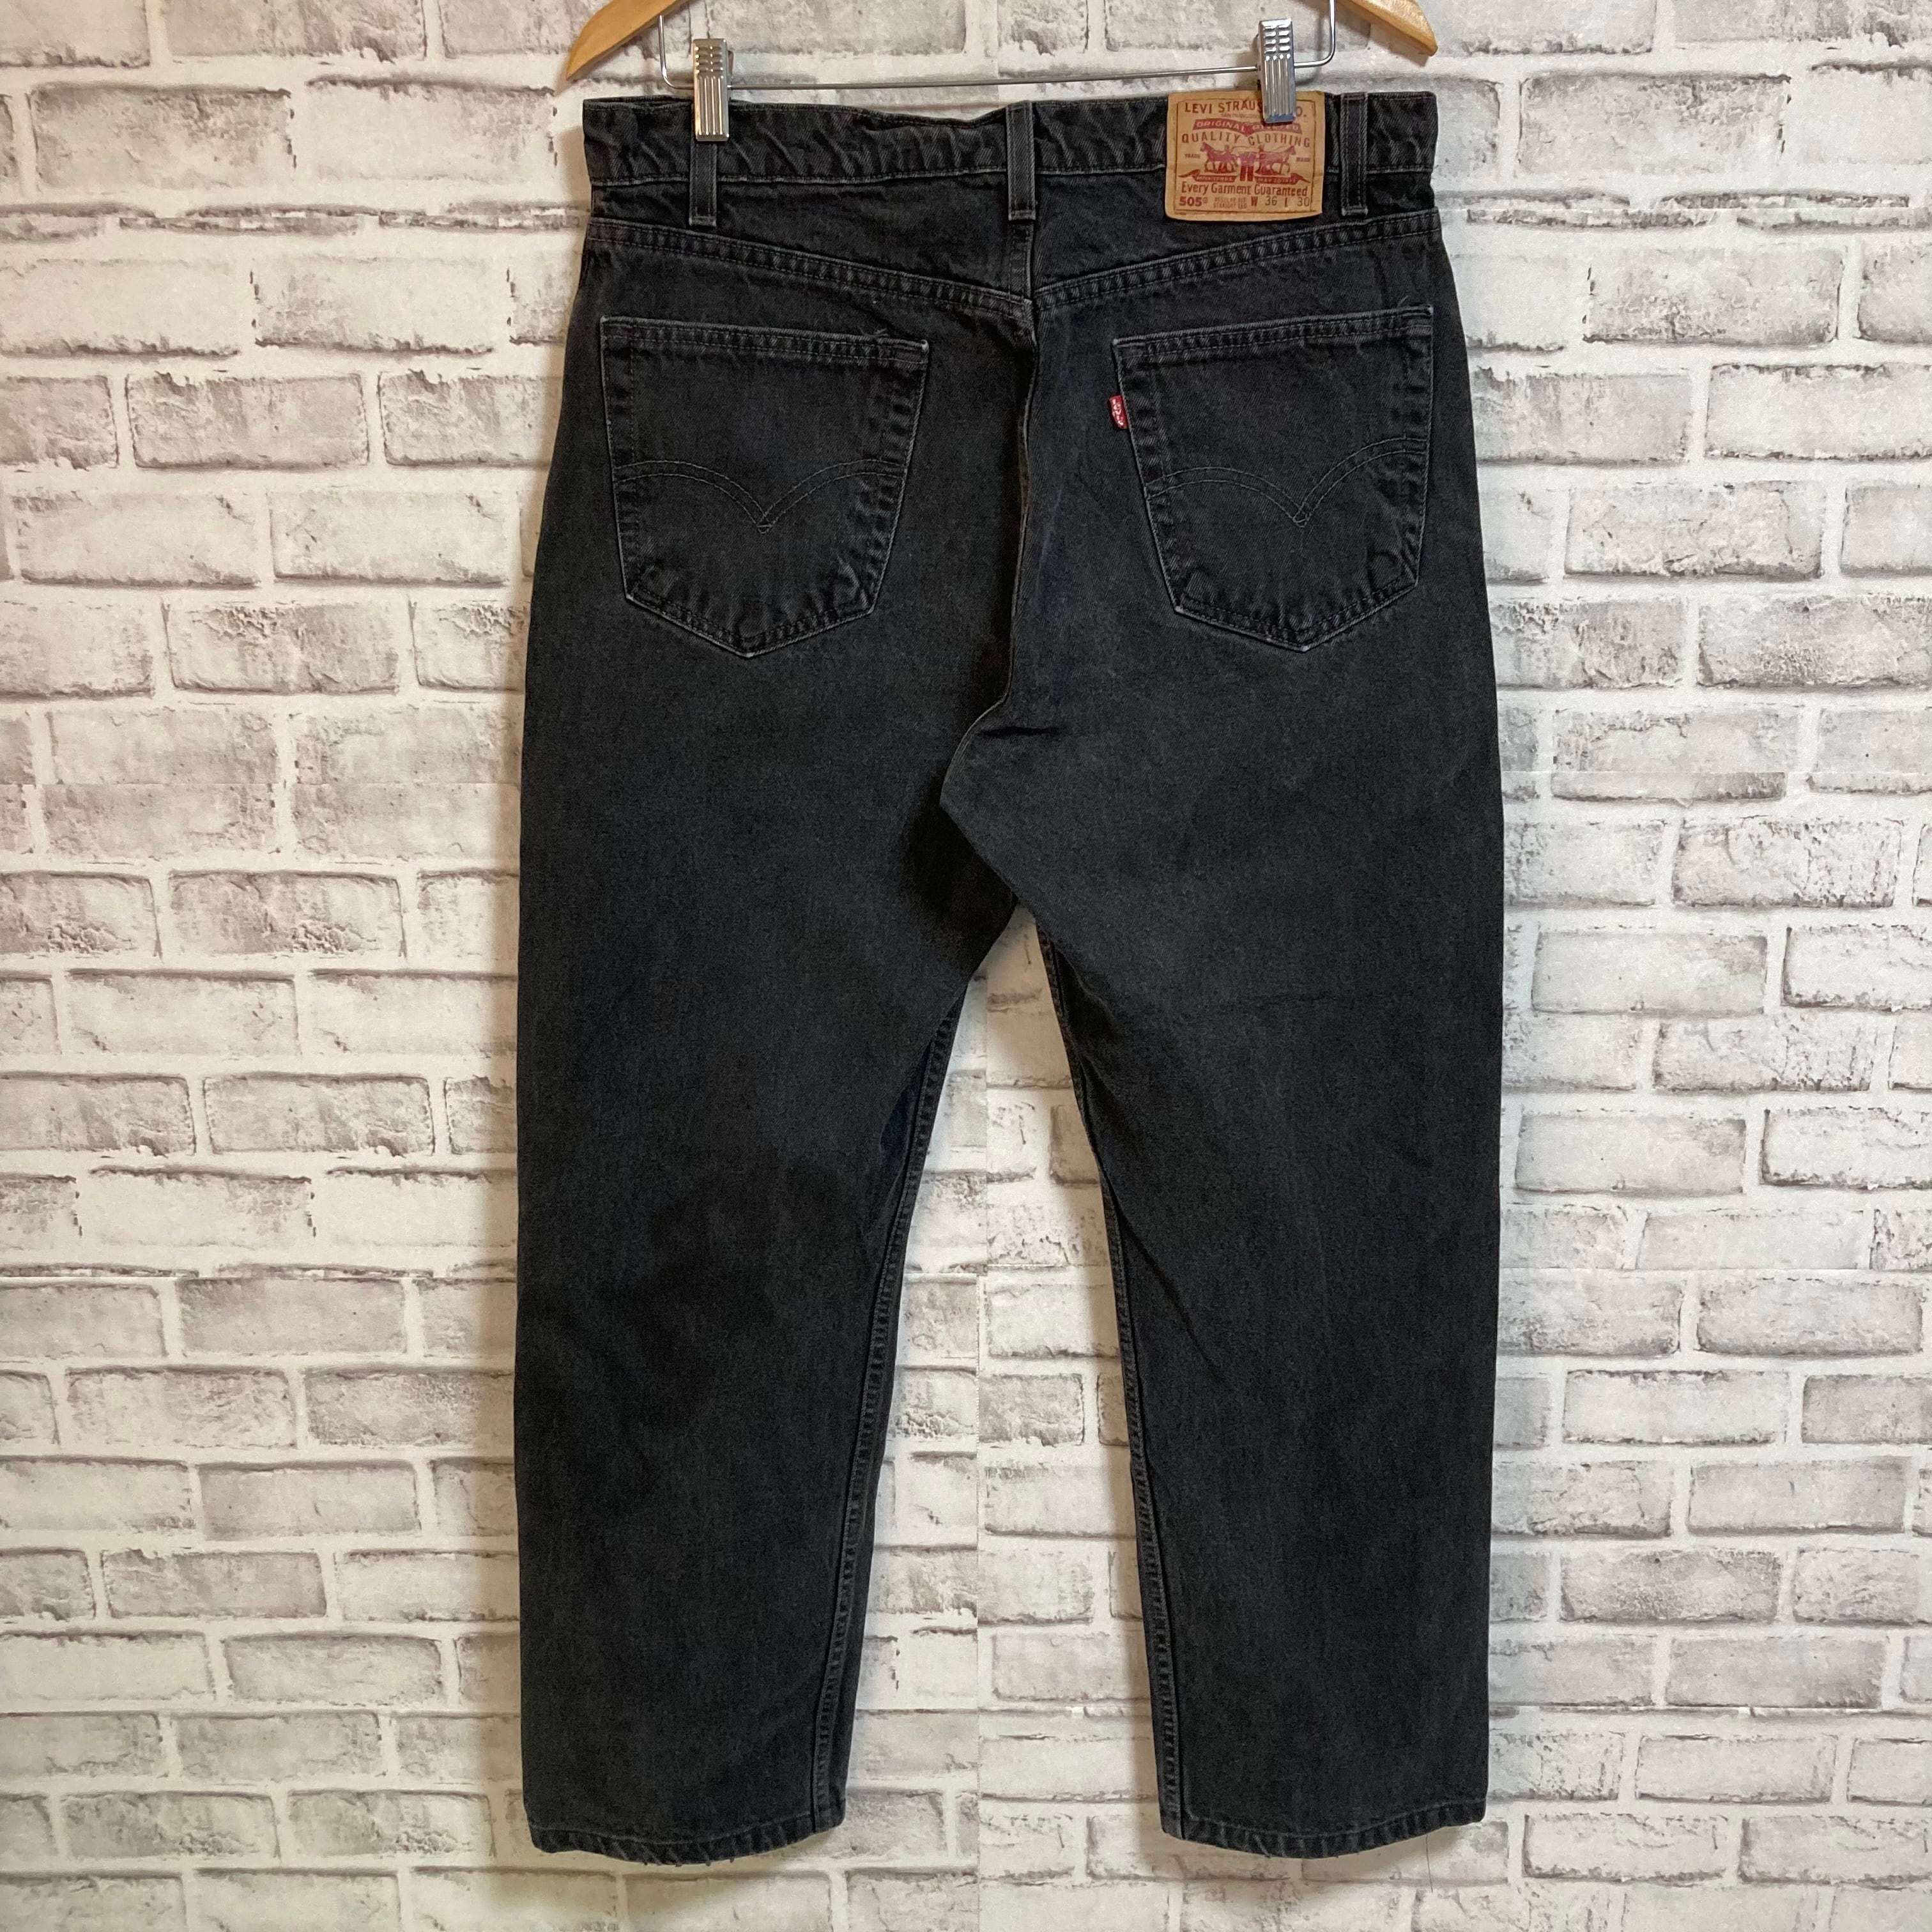 Levi's 505】W36×L30 Made in USA 90s Denim Jeans リーバイス 505 USA ...